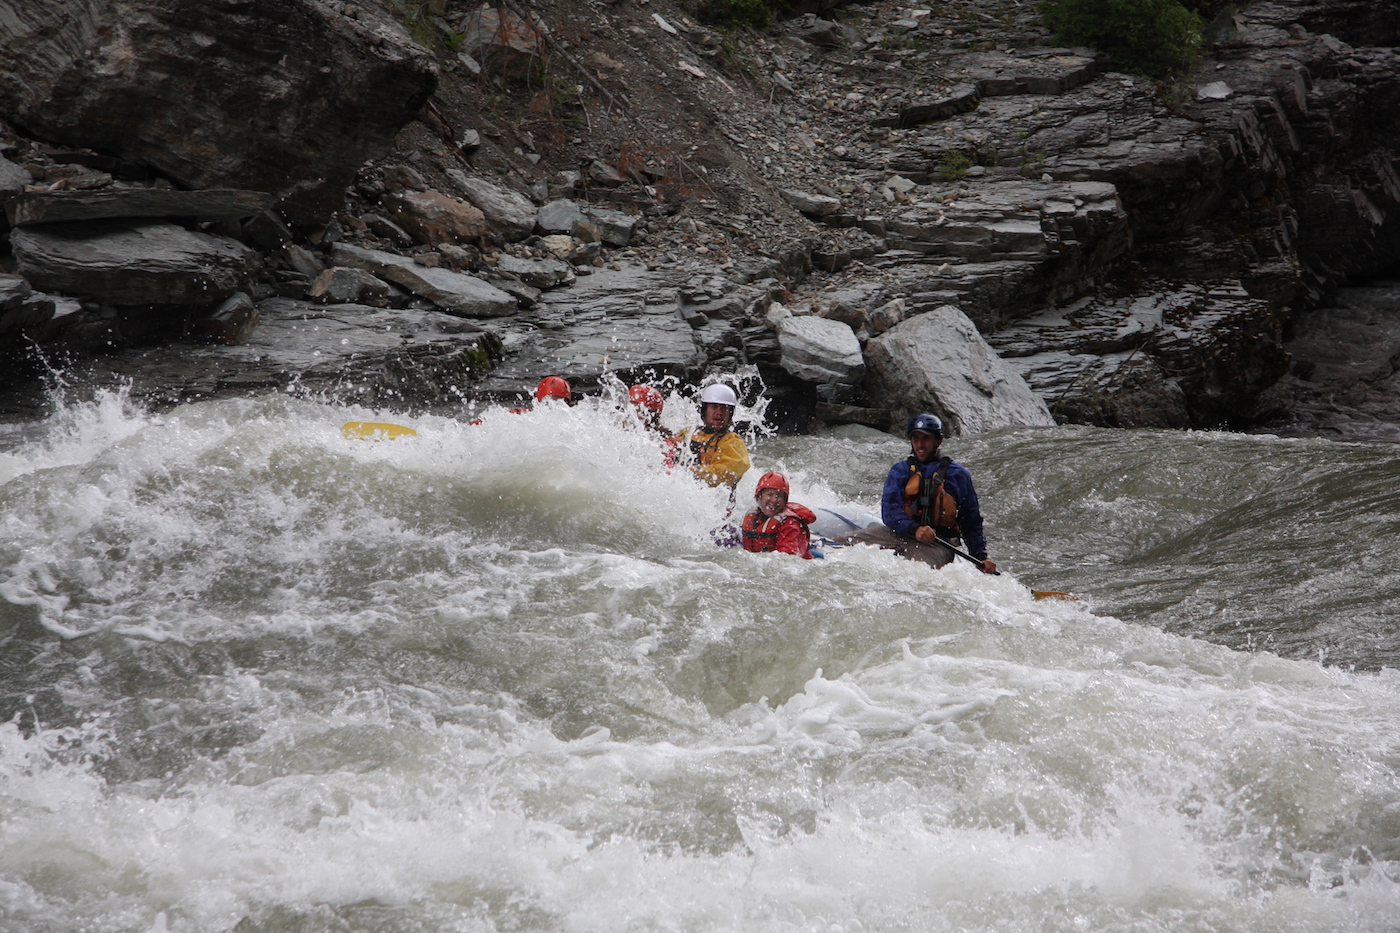 Rafting the Elk River in Canada. I can't believe I did this!